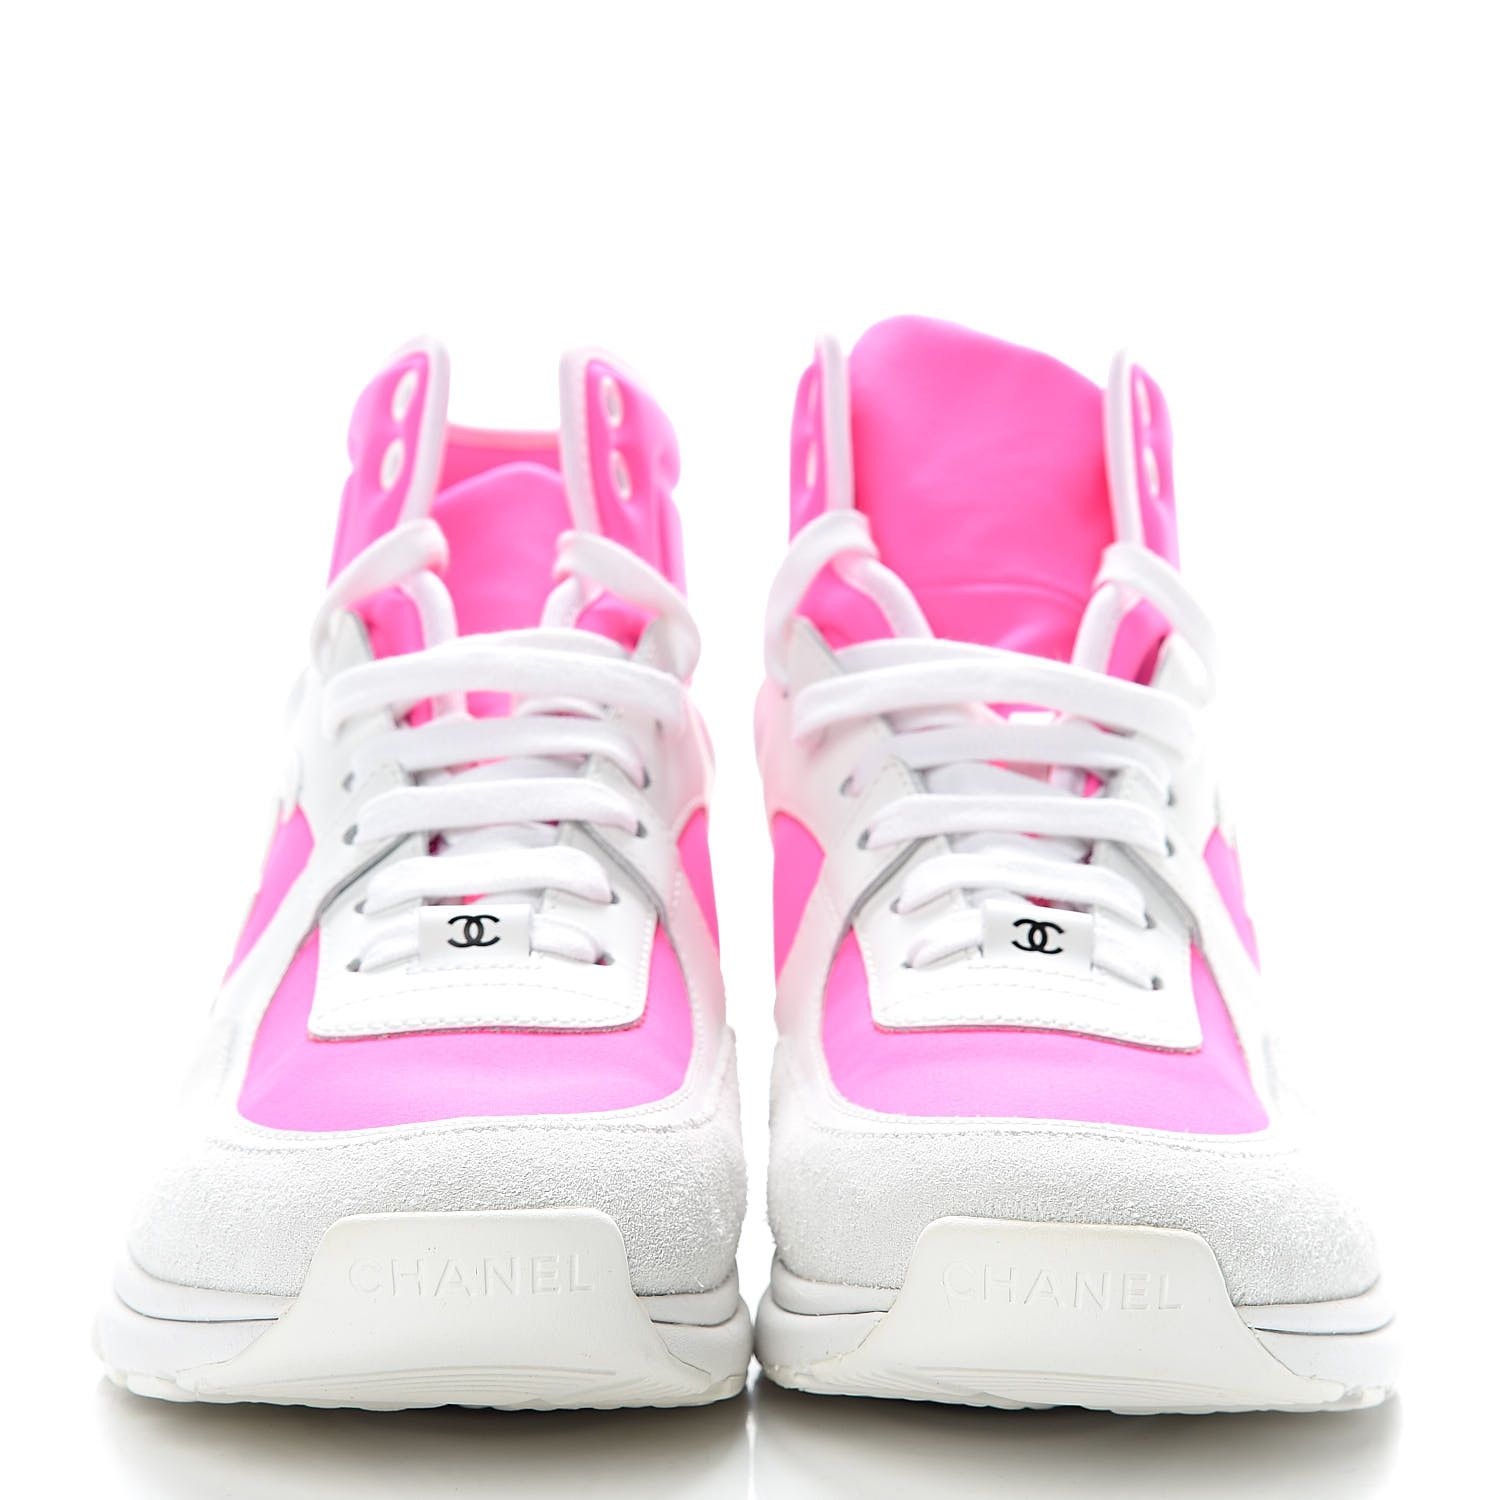 pink high top chanel sneakers